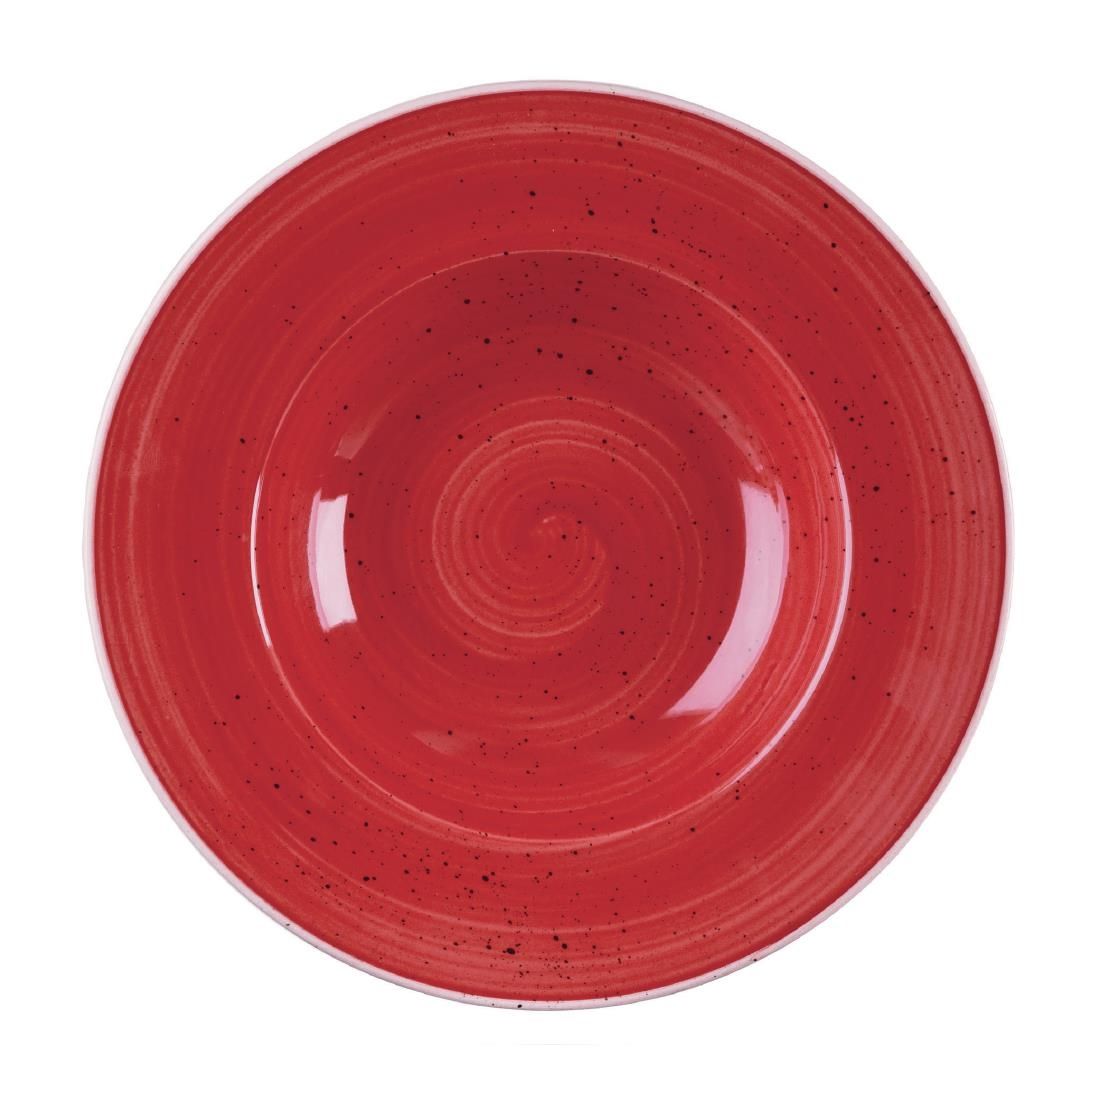 DM466 Churchill Stonecast Round Wide Rim Bowl Berry Red 280mm (Pack of 12) JD Catering Equipment Solutions Ltd